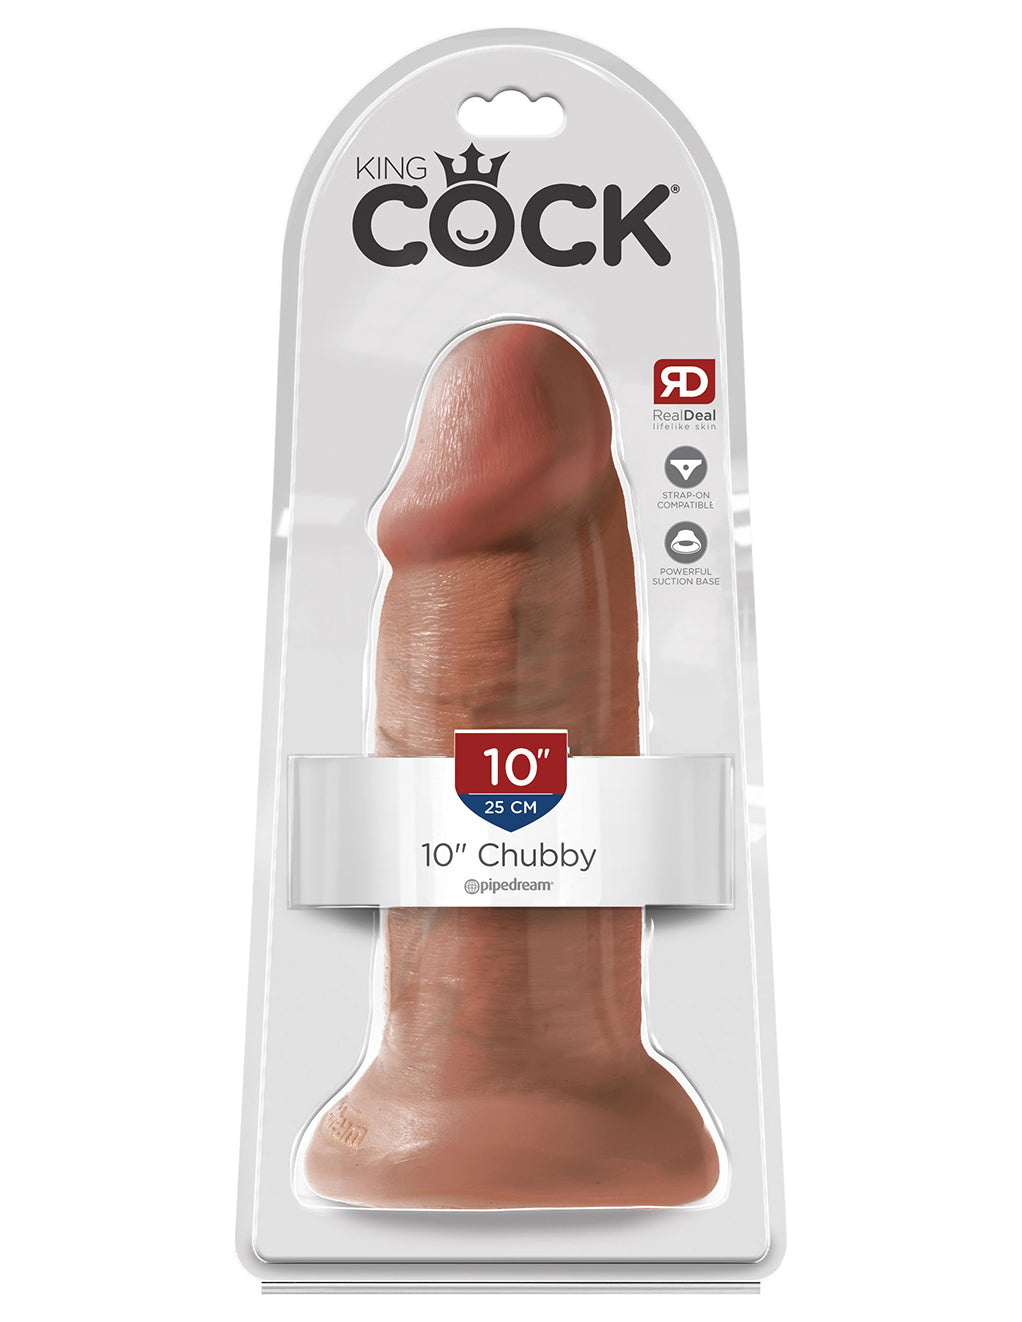 King Cock 10" Chubby Dildo- Package